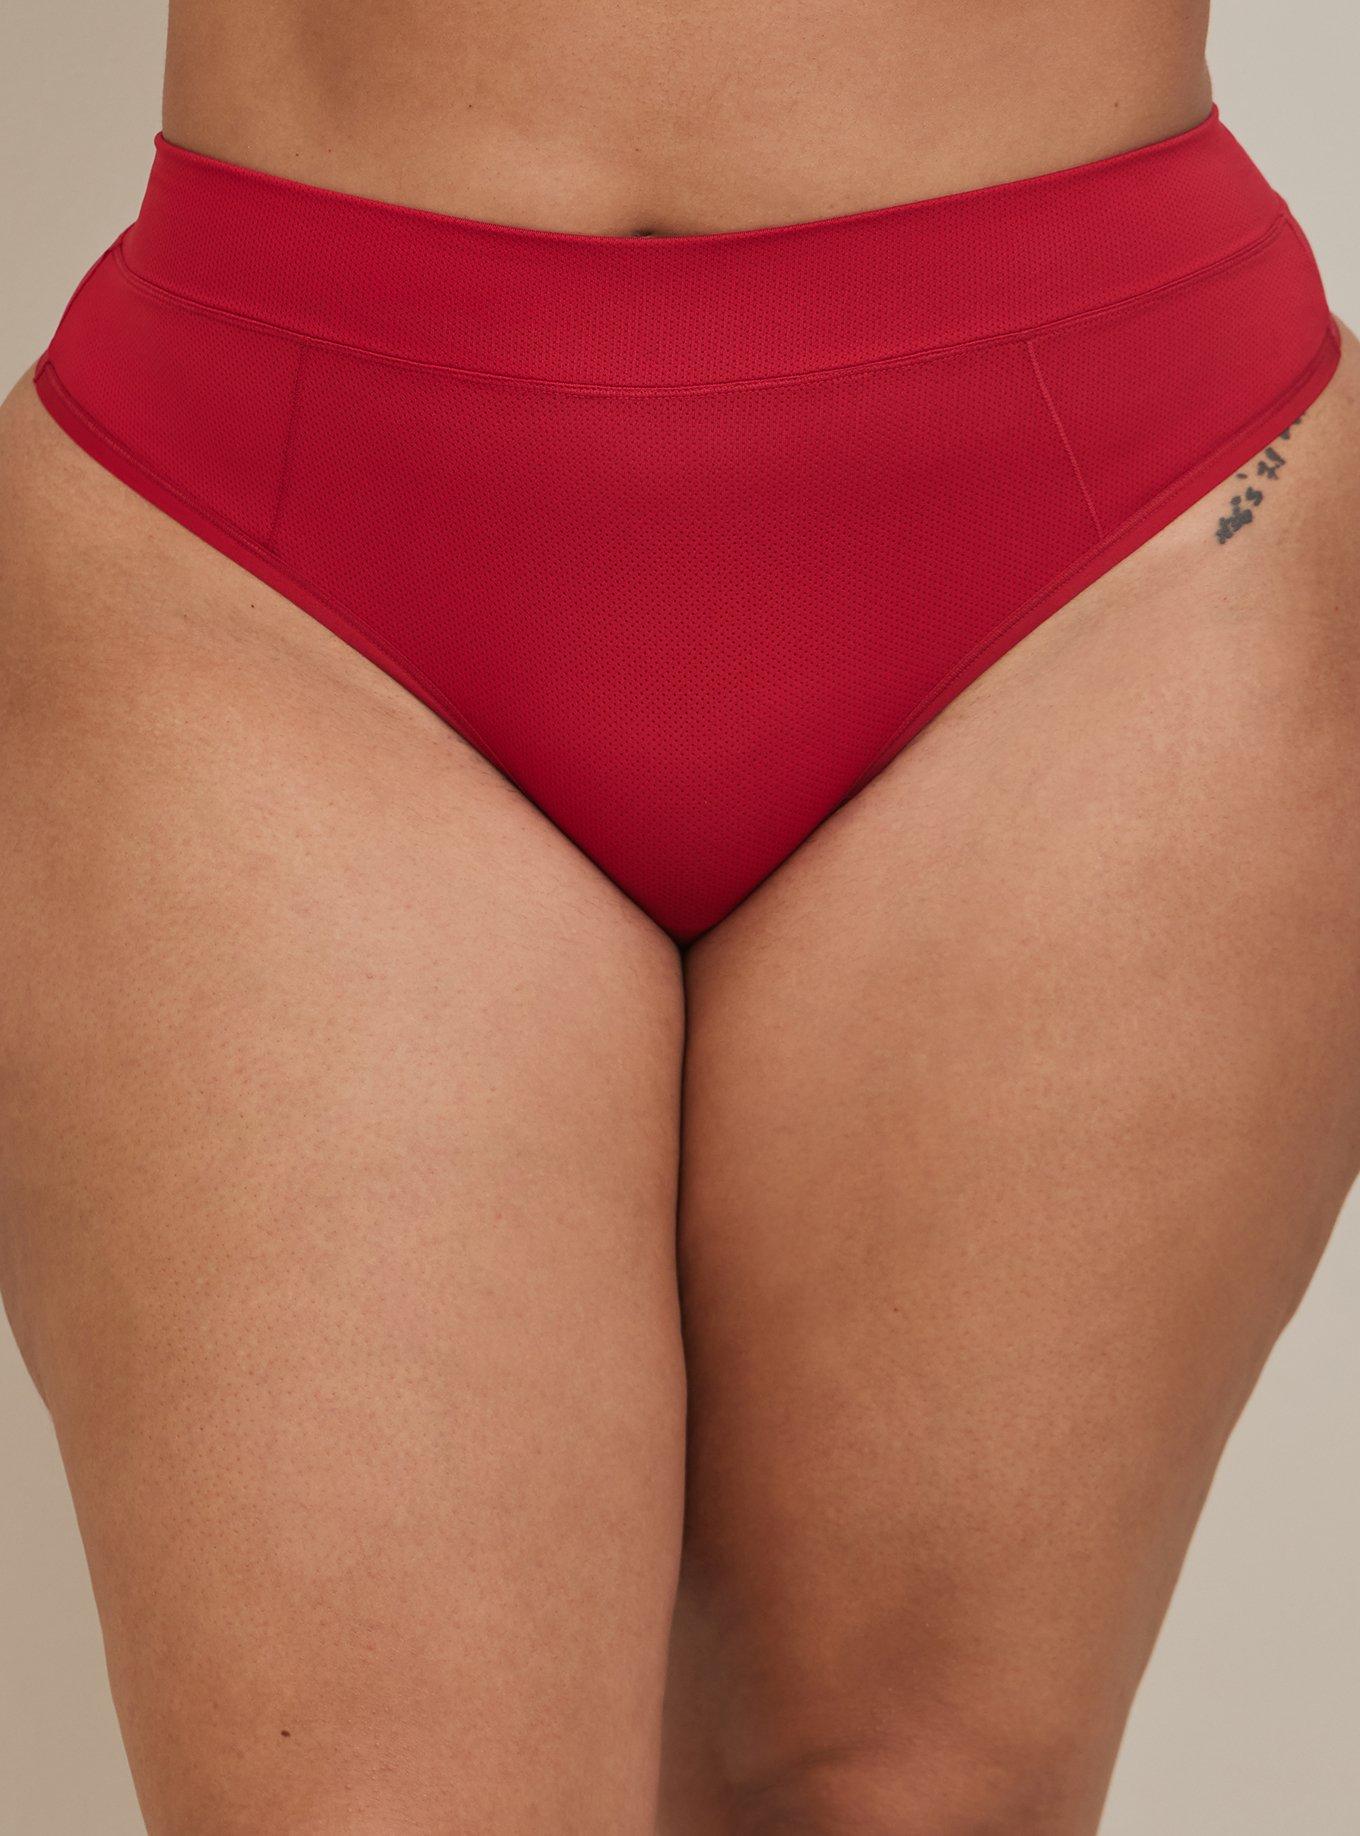 Ardene Contrast Lace Thong Panty in, Size, Nylon/Spandex, Microfiber